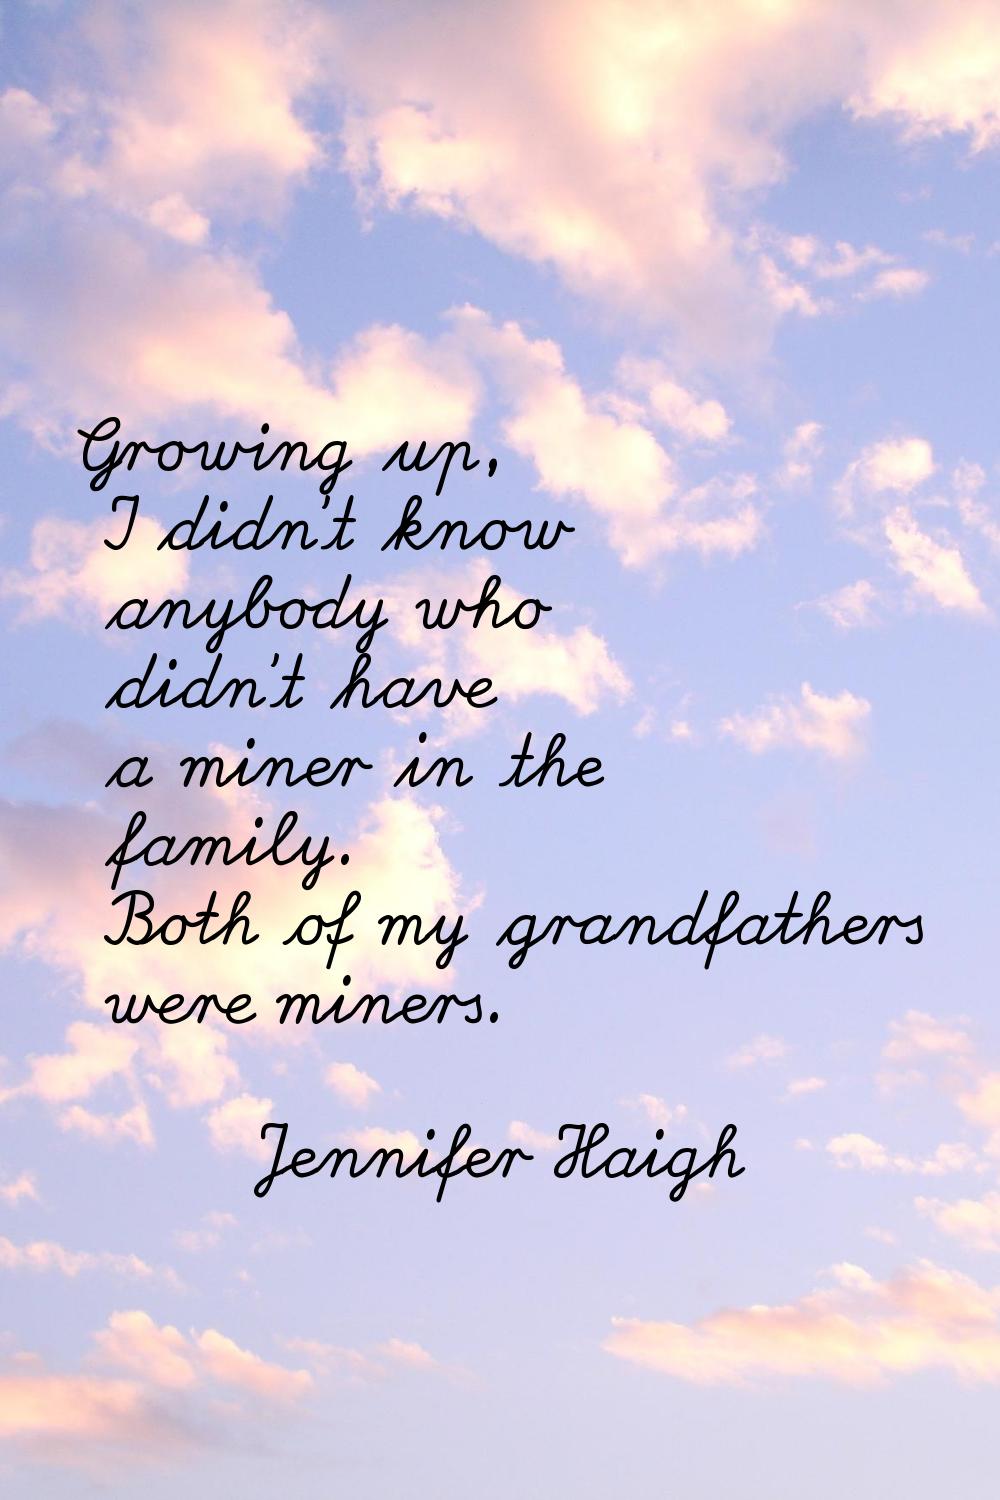 Growing up, I didn't know anybody who didn't have a miner in the family. Both of my grandfathers we